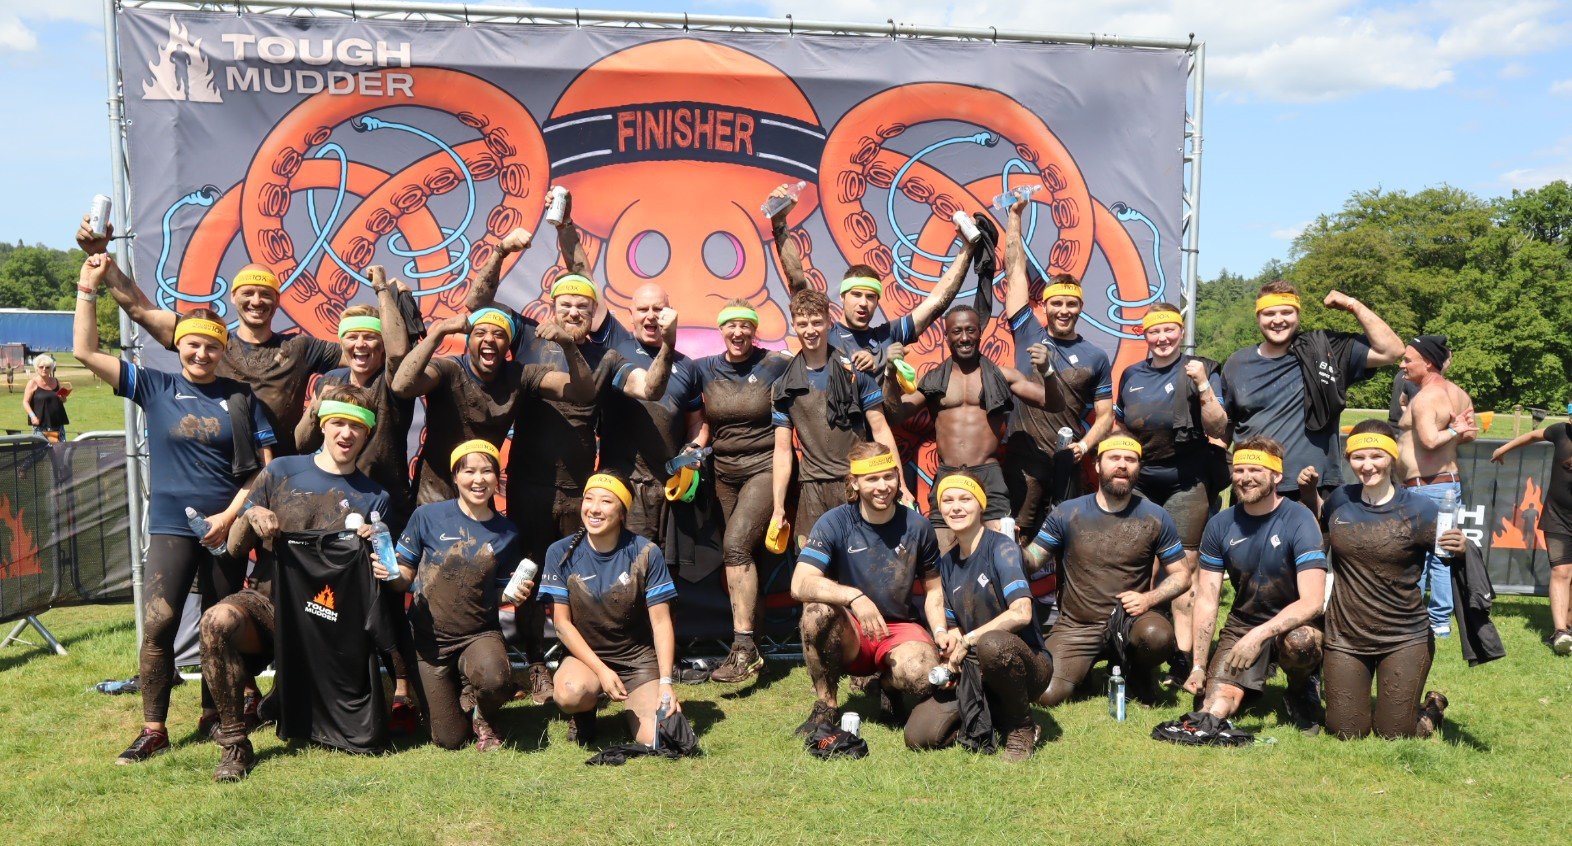 Component Sense team photo from the finish line of the Tough Mudder event.